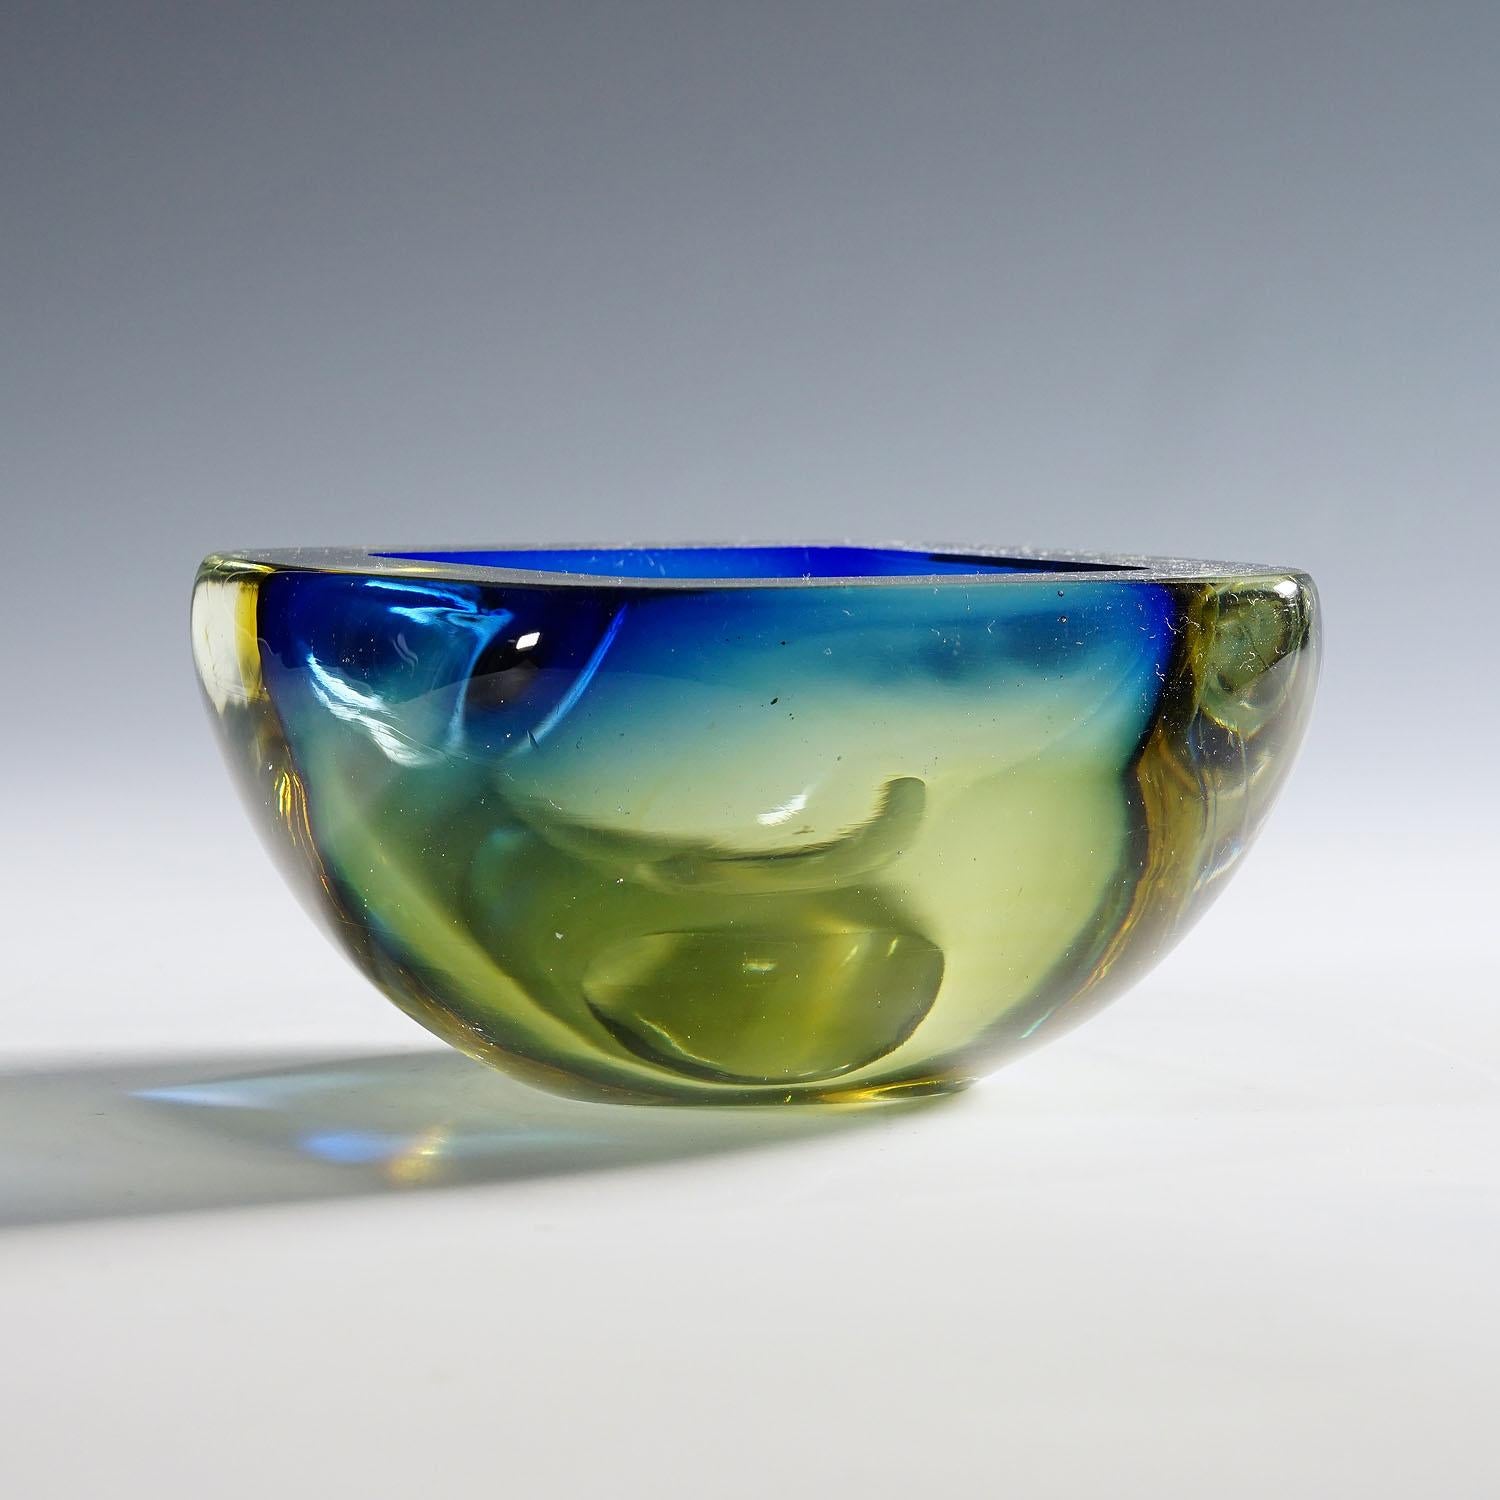 Italian Midcentury Modern Murano Blue and Yellow Sommerso Art Glass Bowl 1960s For Sale